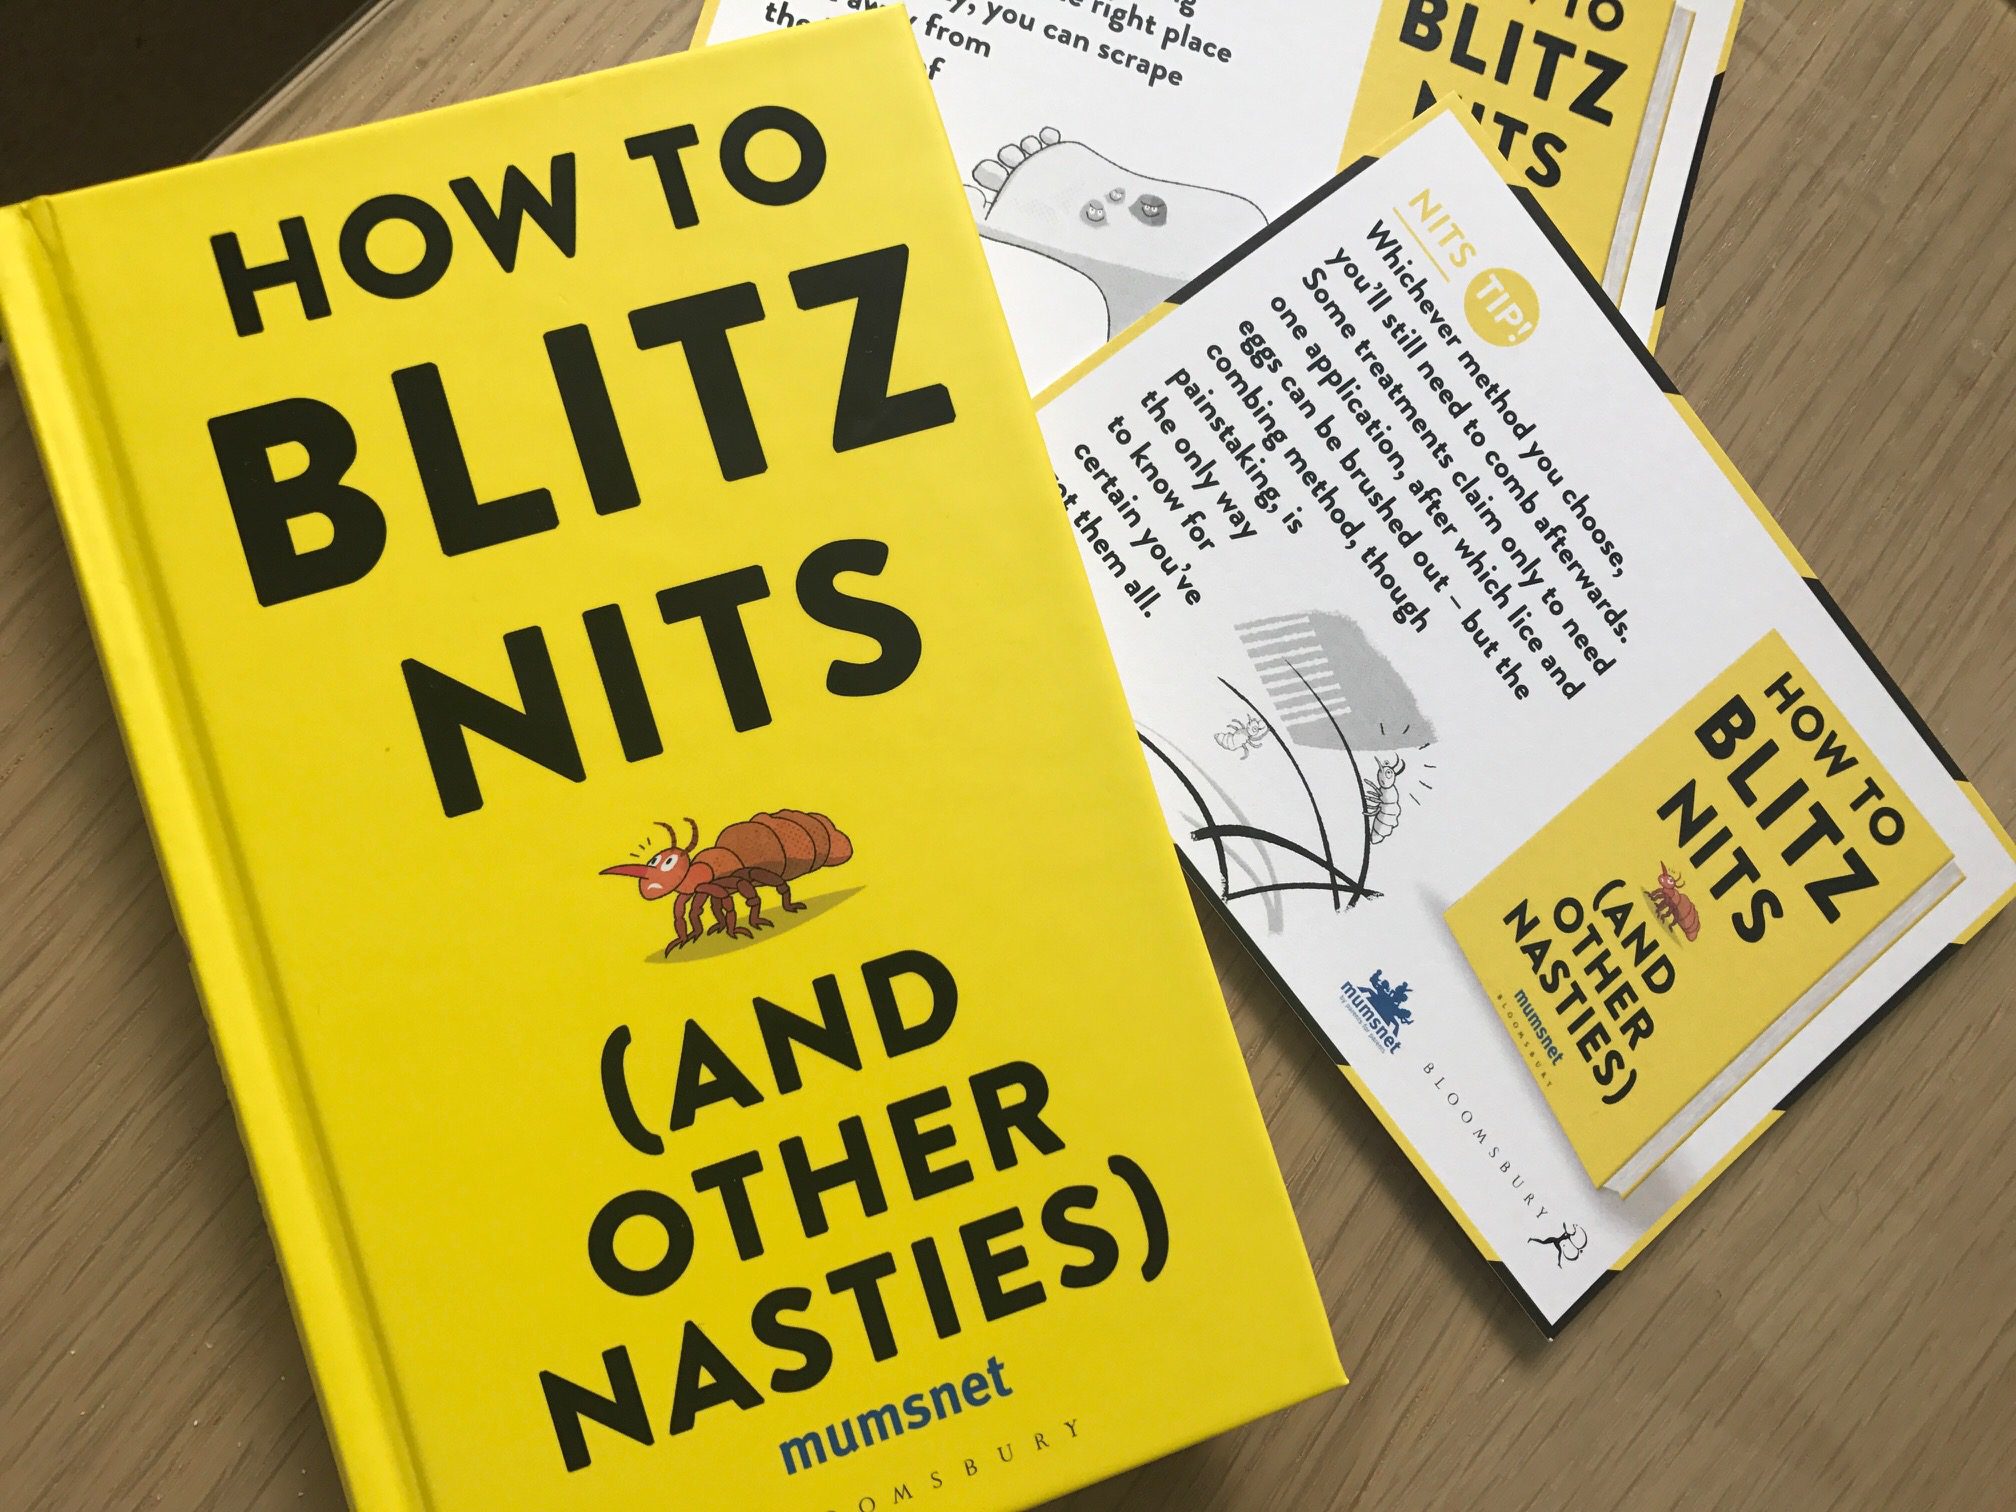 REVIEW – Blitz those Nits (and other nasties)